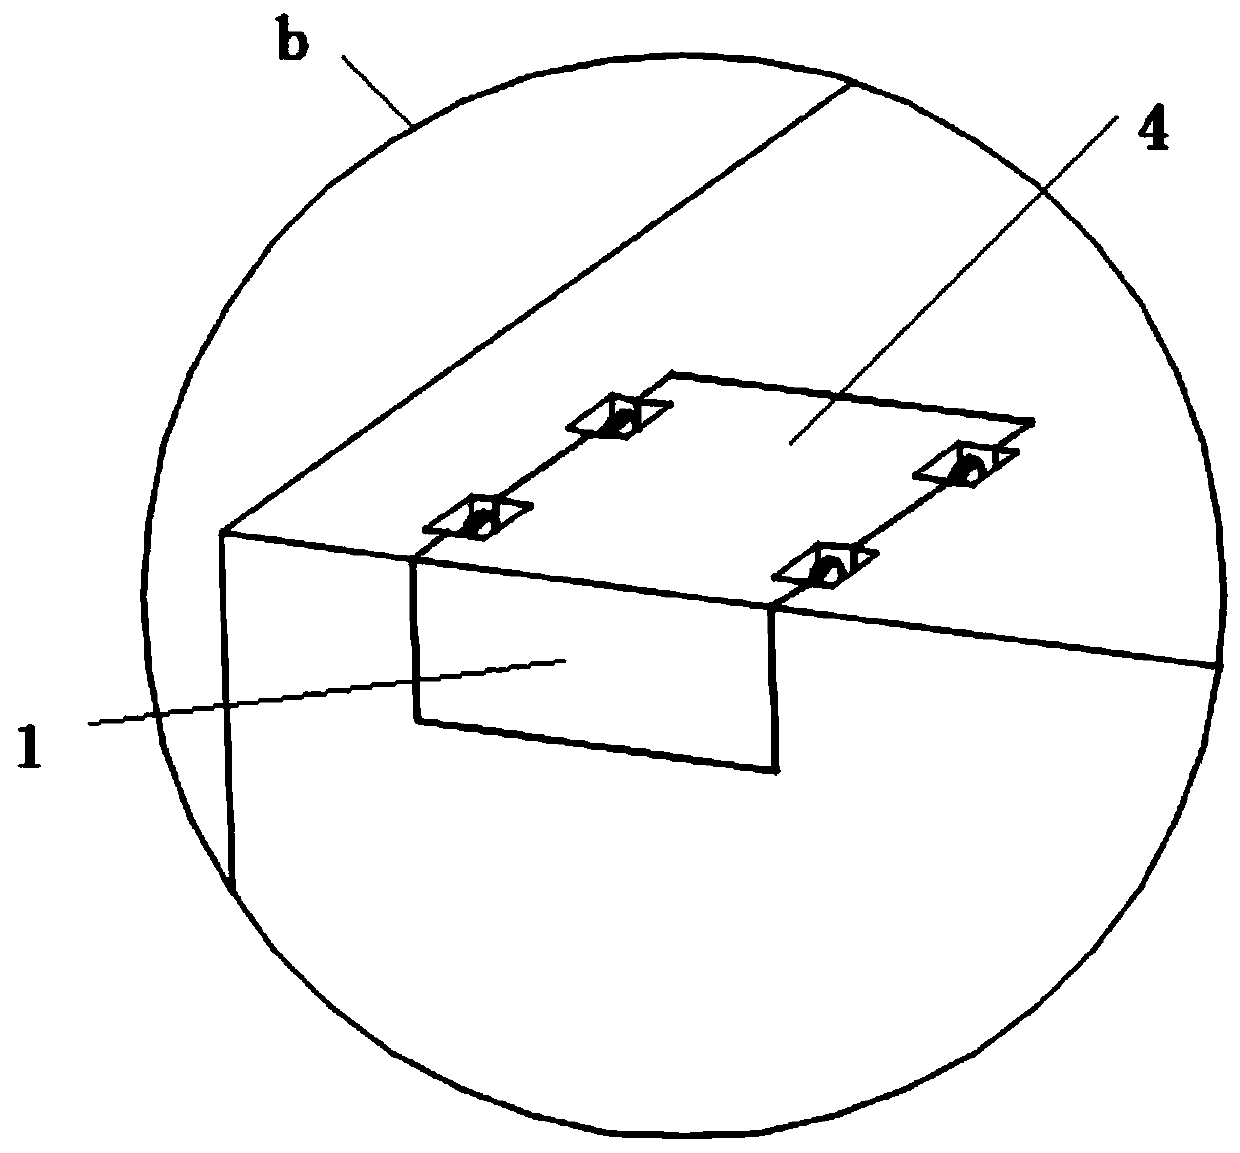 Refrigerator box body connecting structure